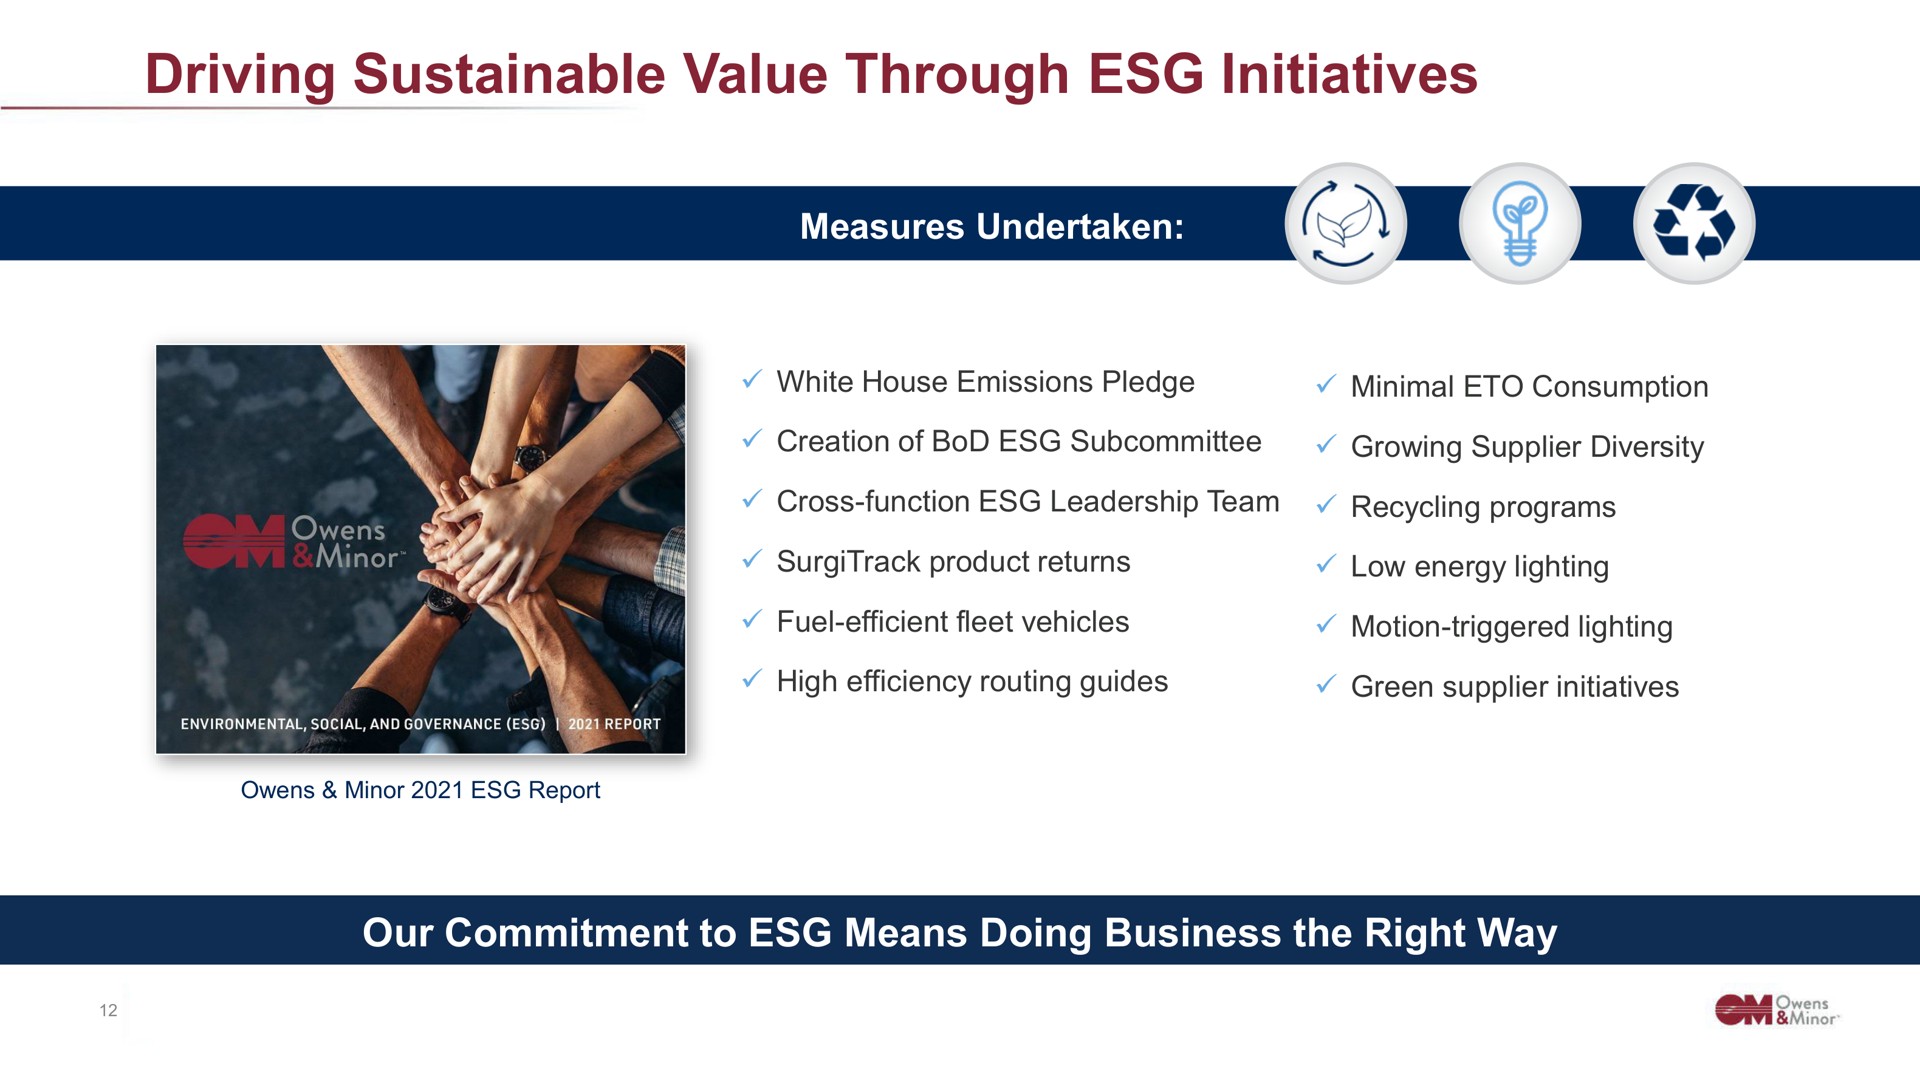 driving sustainable value through initiatives a our commitment to means doing business the right way | Owens&Minor